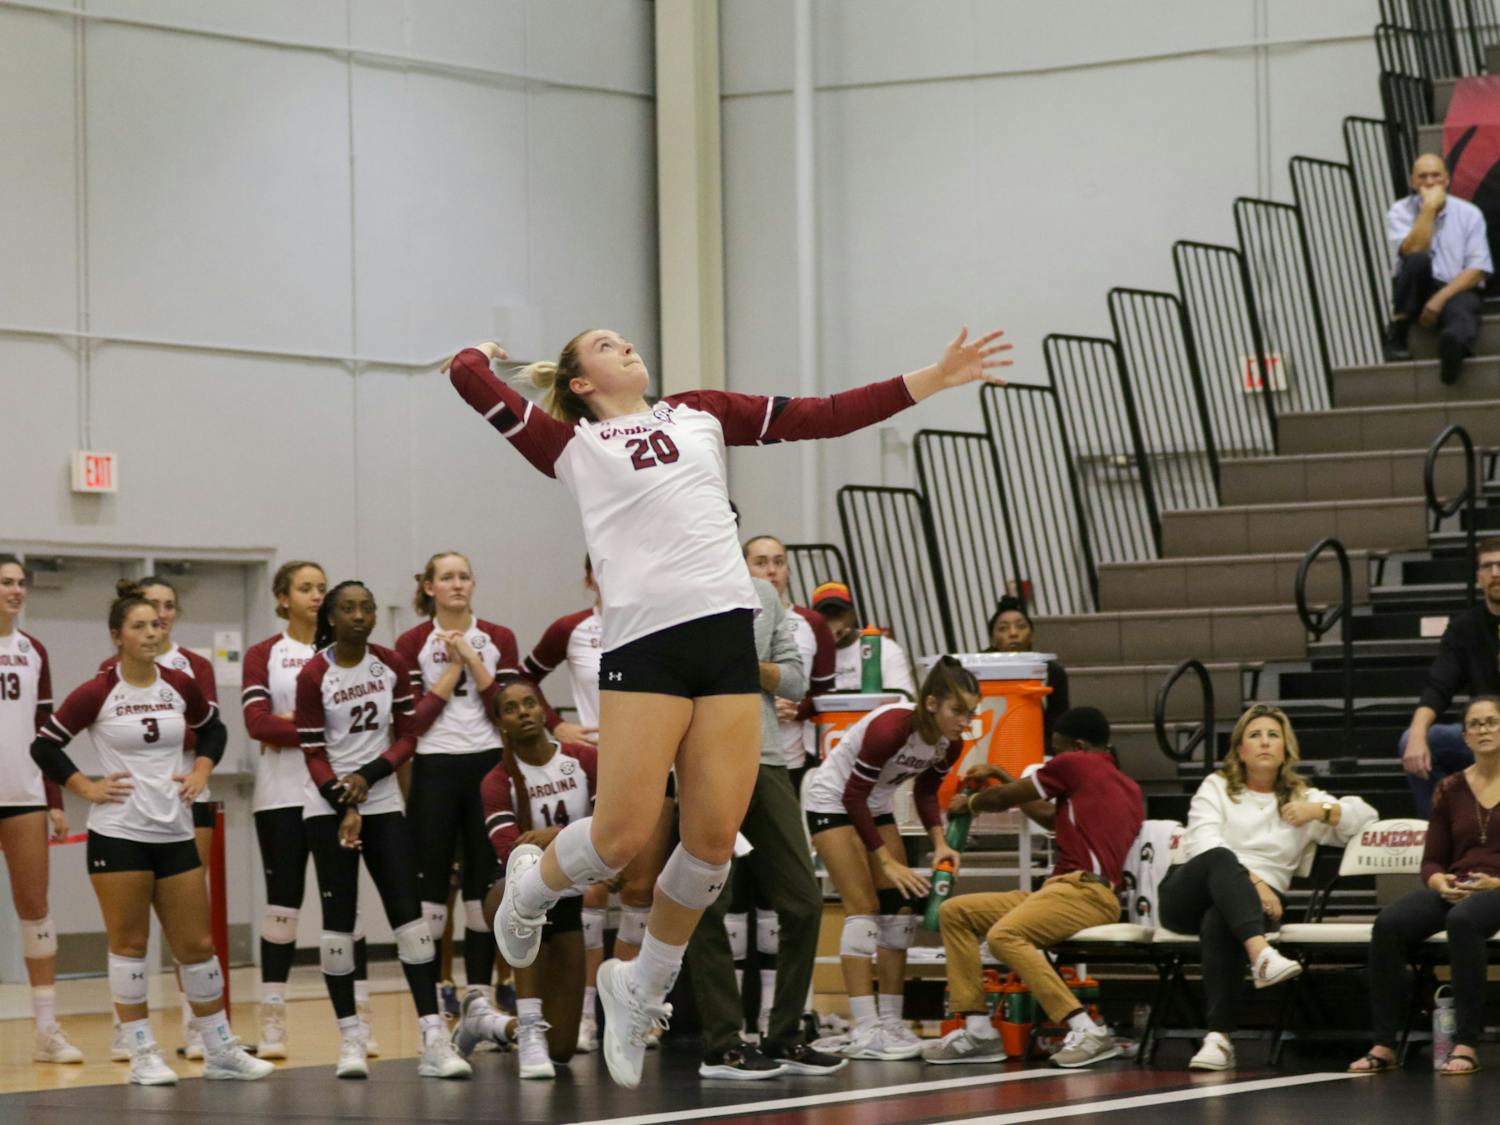 Junior outside Riley Whitesides serving at South Carolina’s game against Mizzou on Oct. 1, 2022. &nbsp;Strong defensive play earned the South Carolina volleyball team two victories over conference opponent Missouri this weekend.&nbsp;